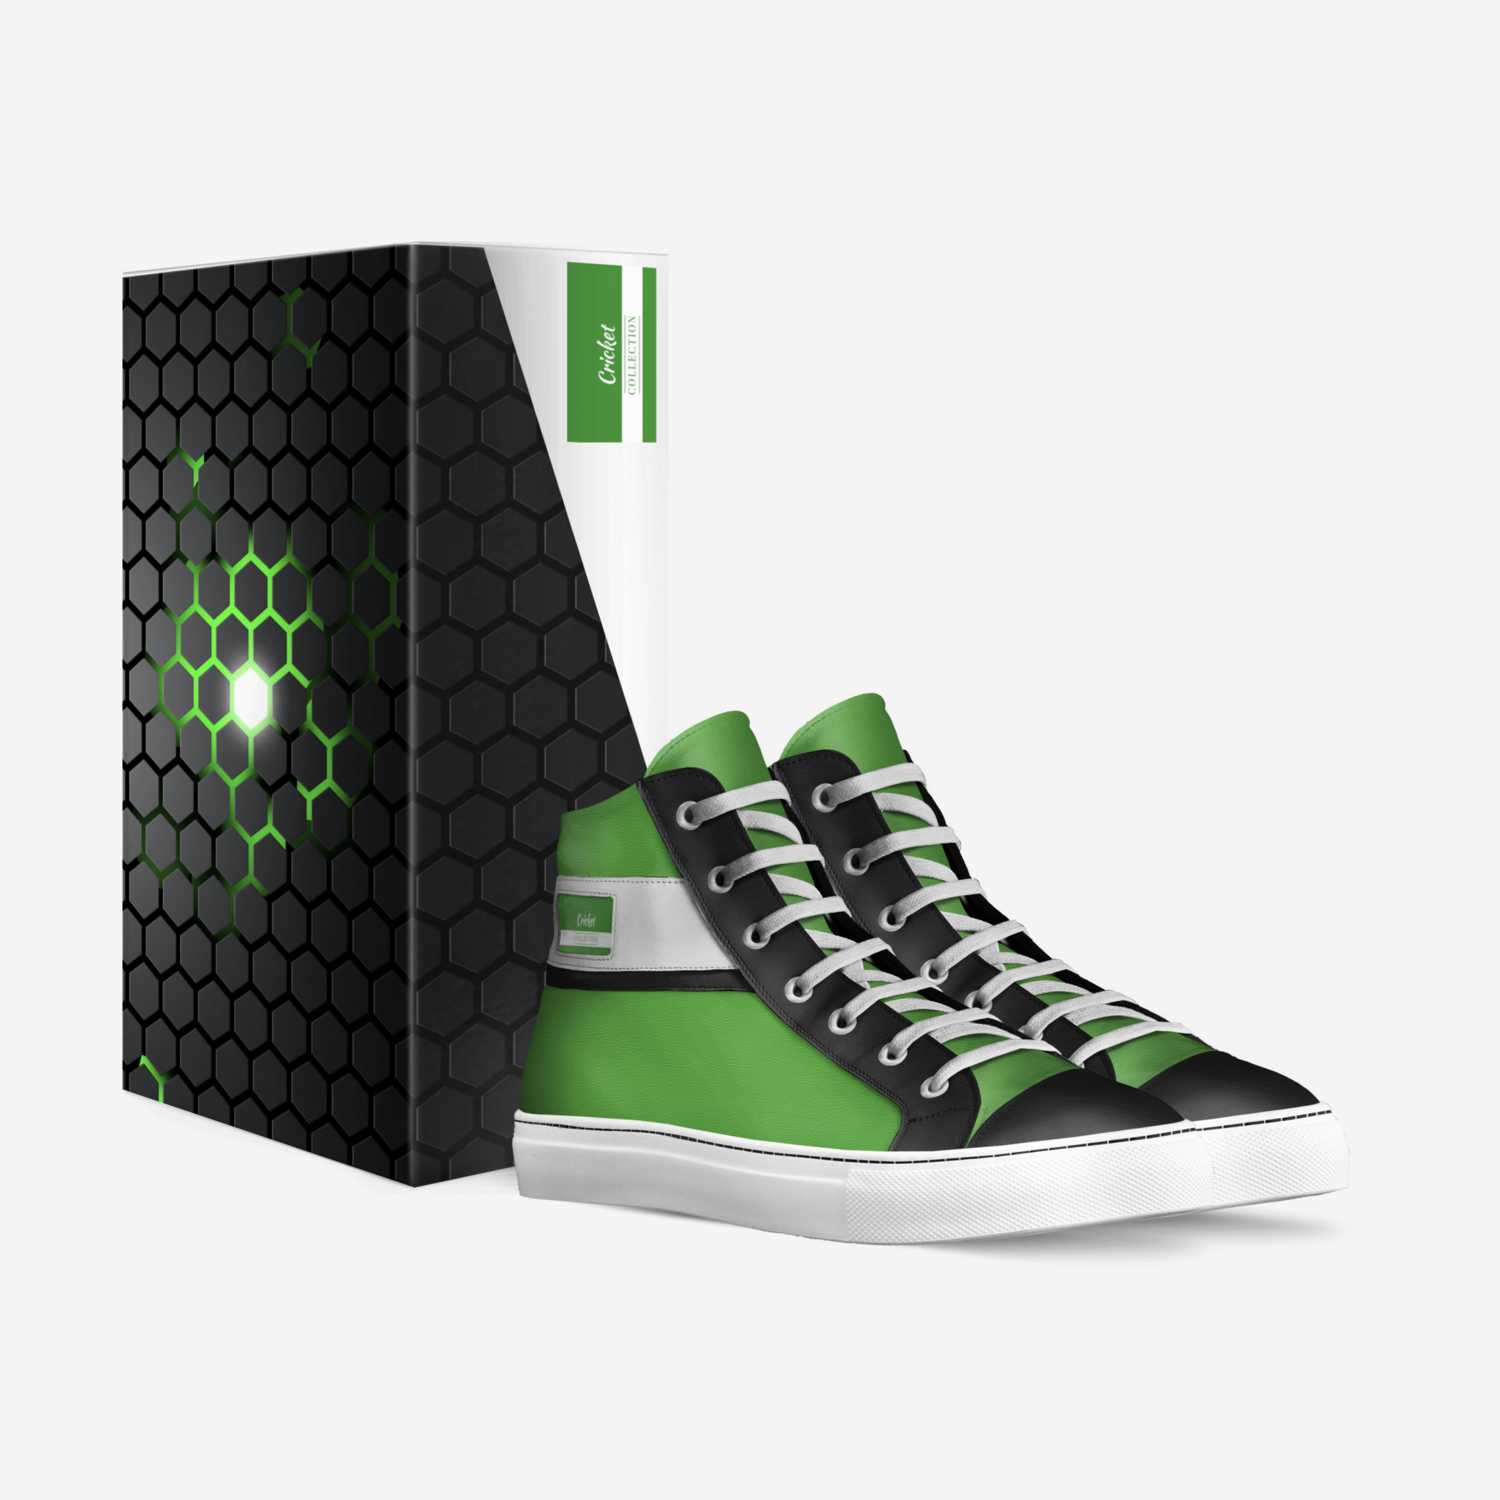 The Hulk's 2018 custom made in Italy shoes by Sorache | Box view